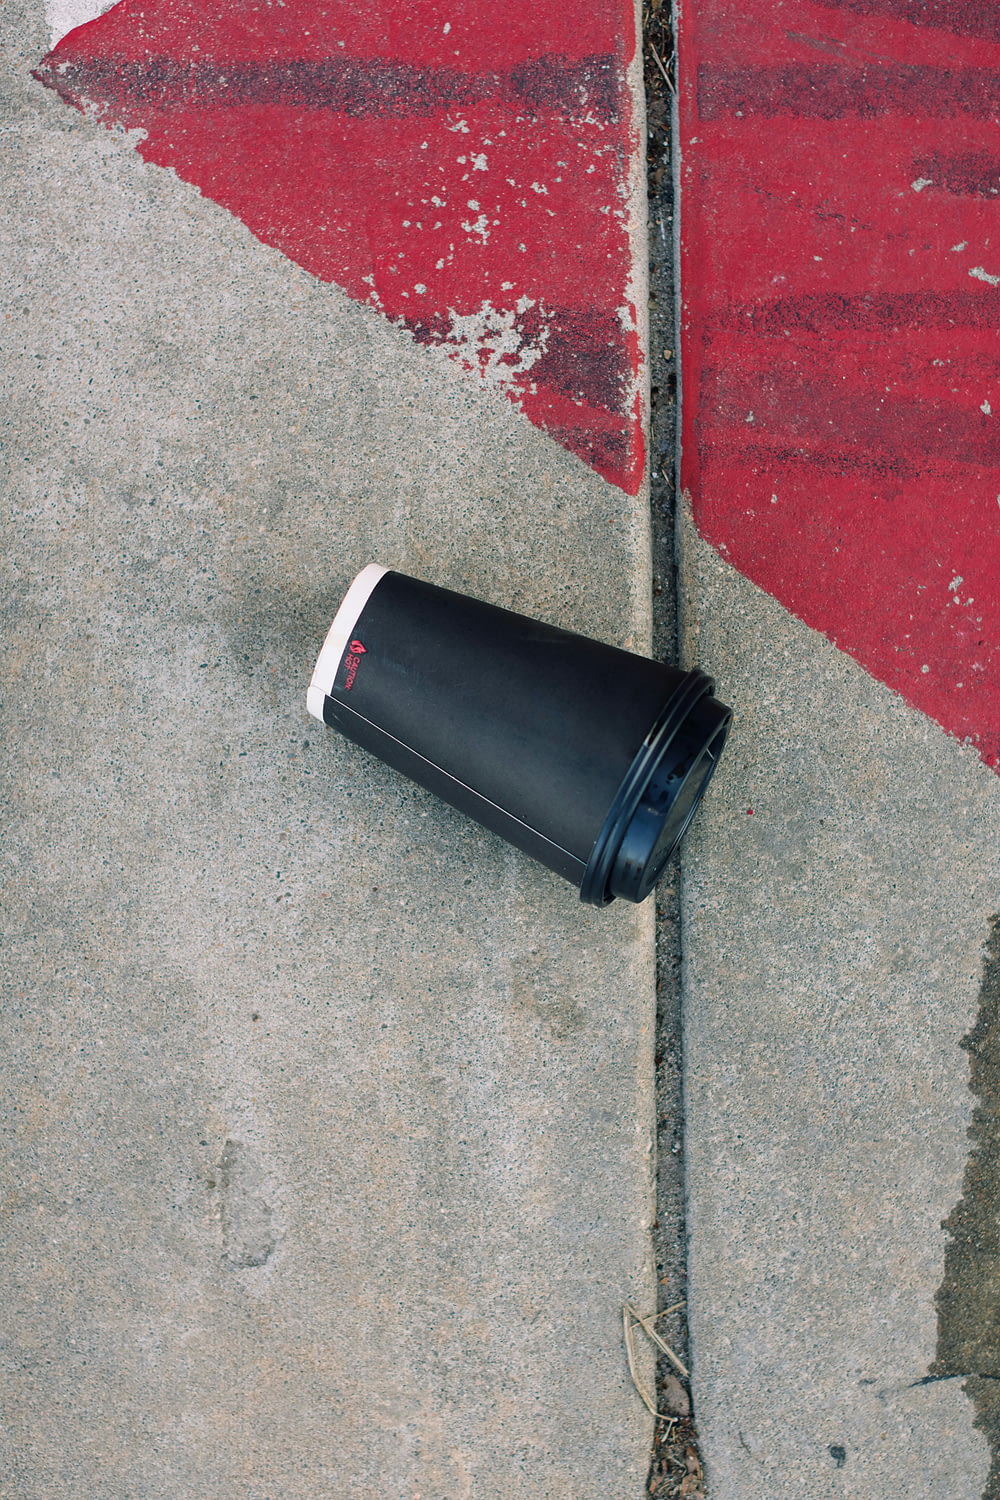 a black trash can sitting on the side of a road